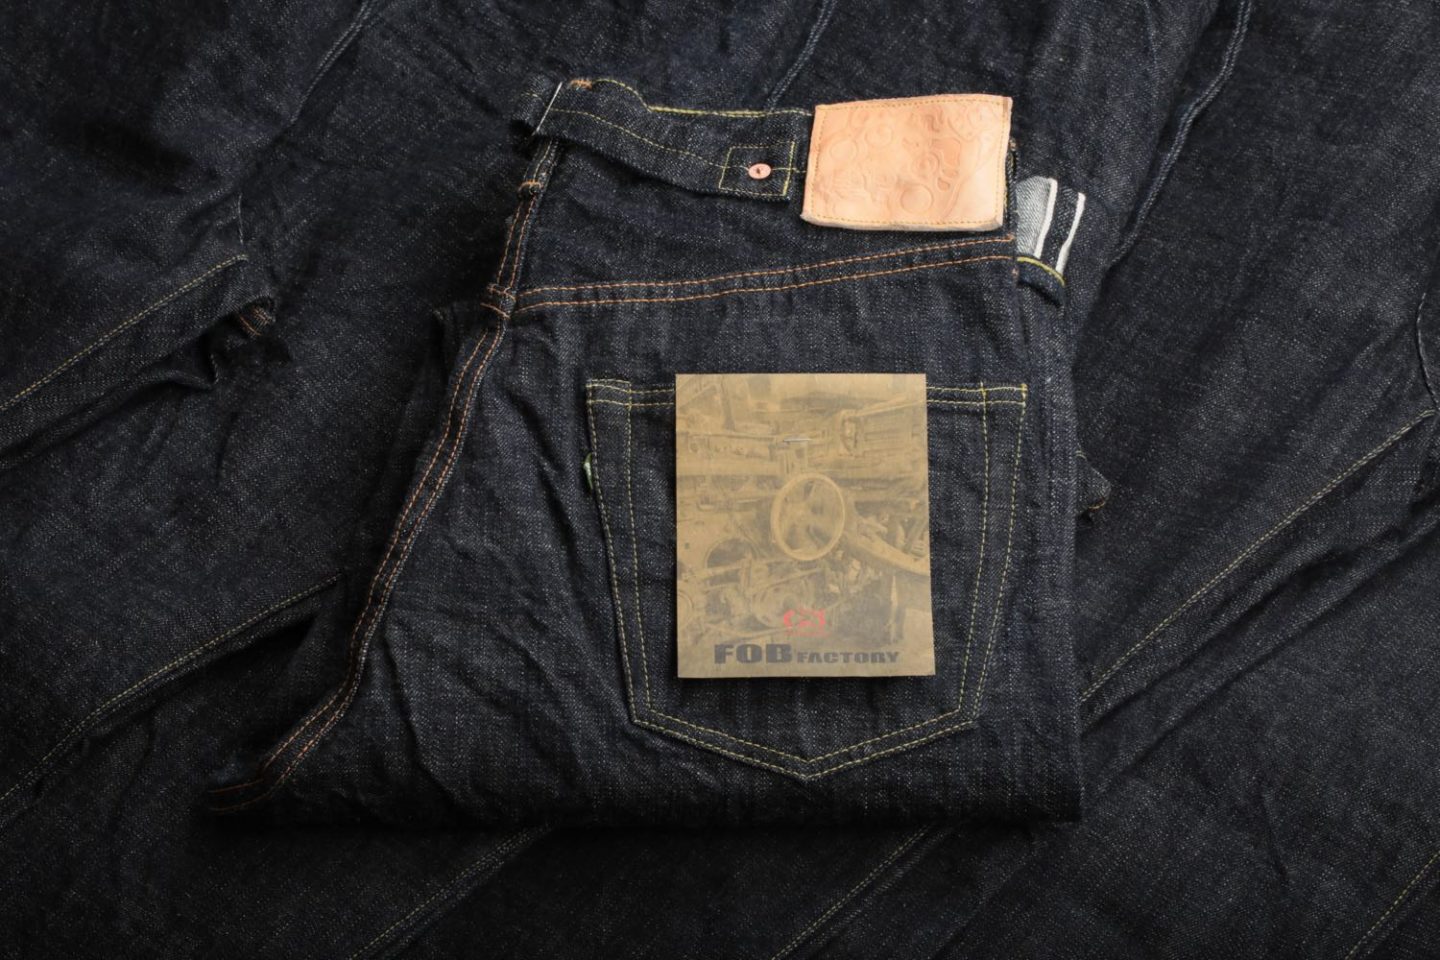  Flâneurs_FOB_factory_jean_G3_loose-tapered_toile_low_tension